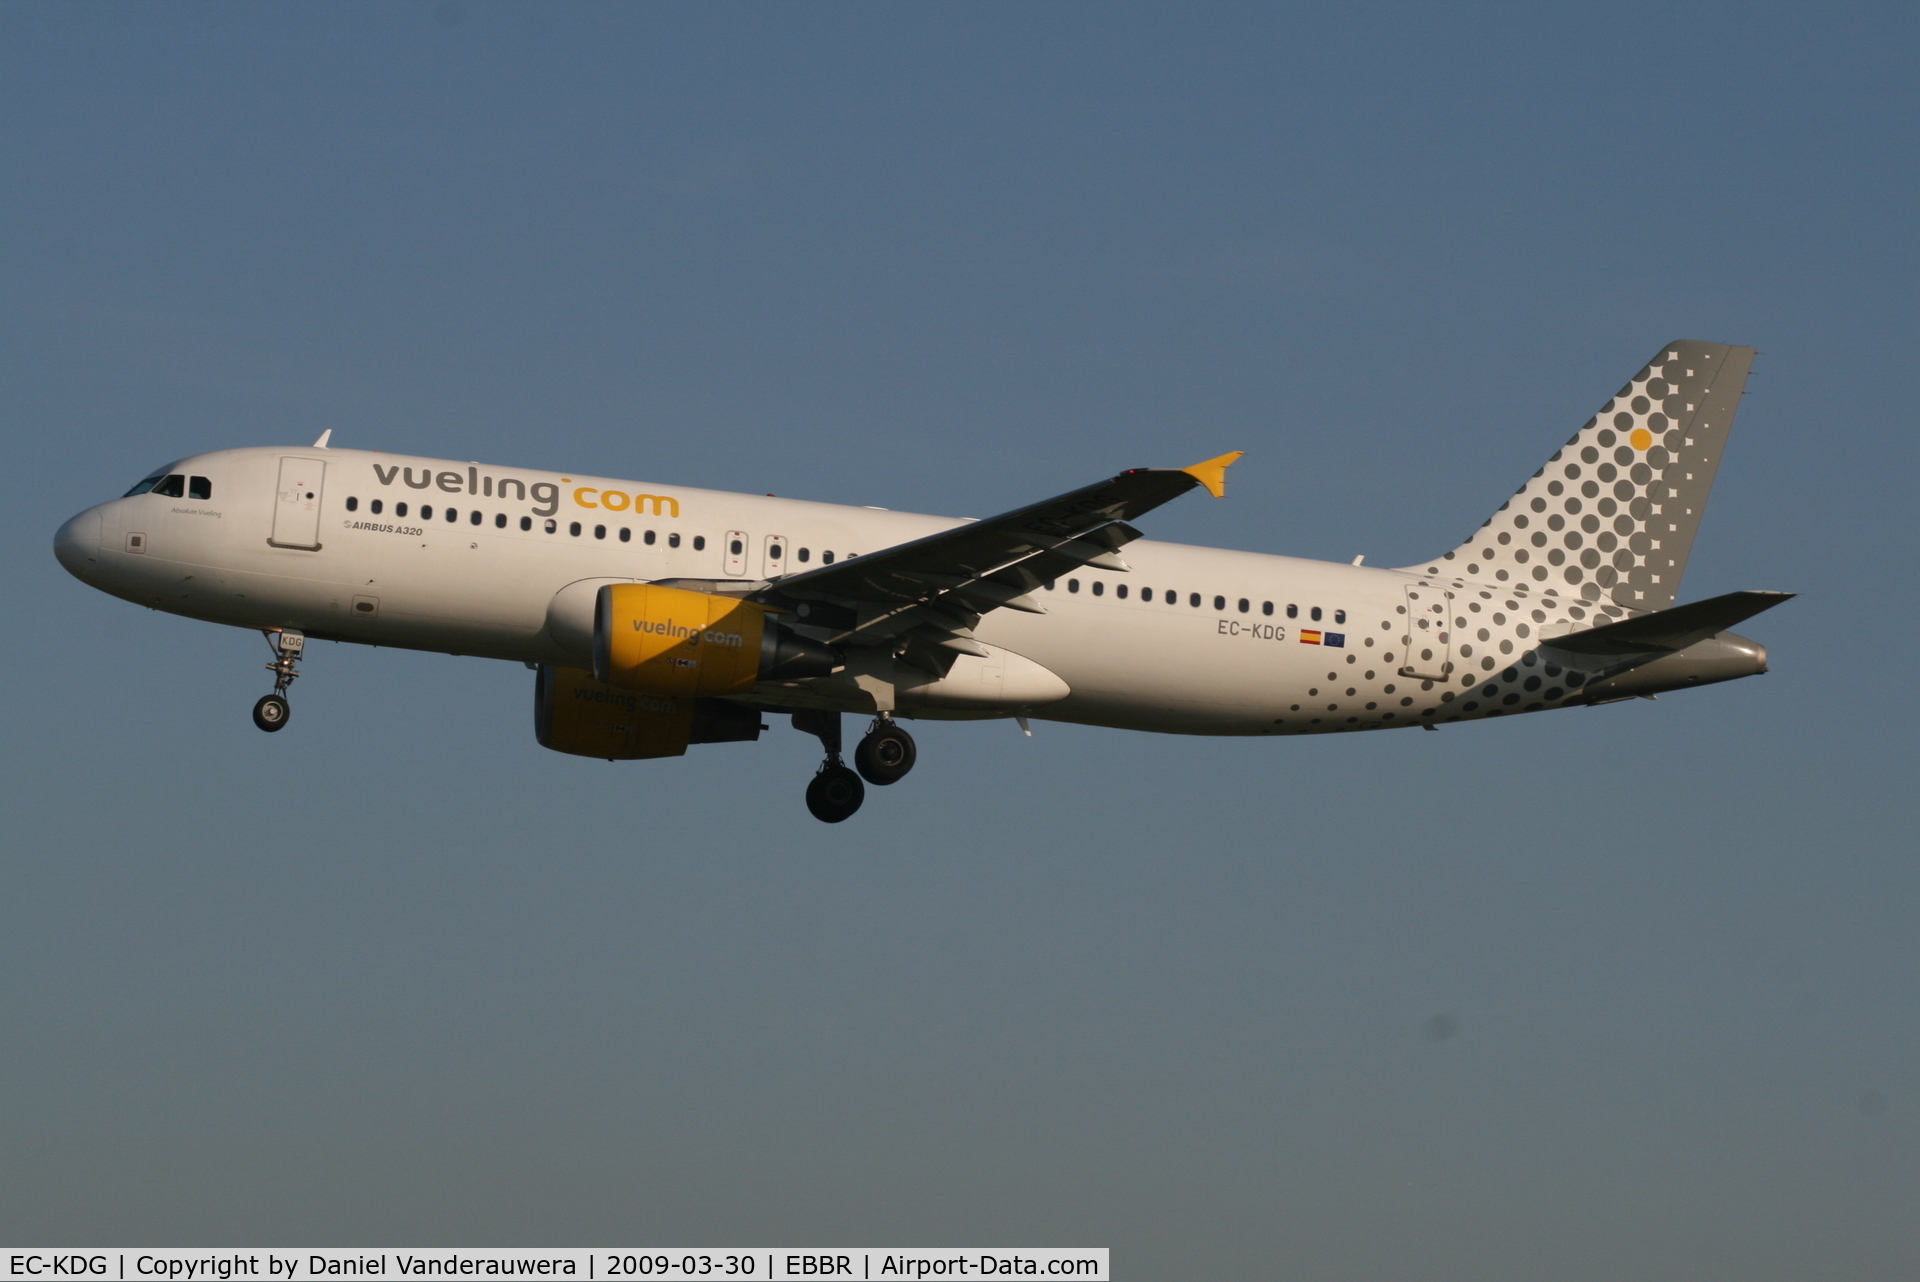 EC-KDG, 2007 Airbus A320-214 C/N 3095, Arrival of flight VY8728 to RWY 25L